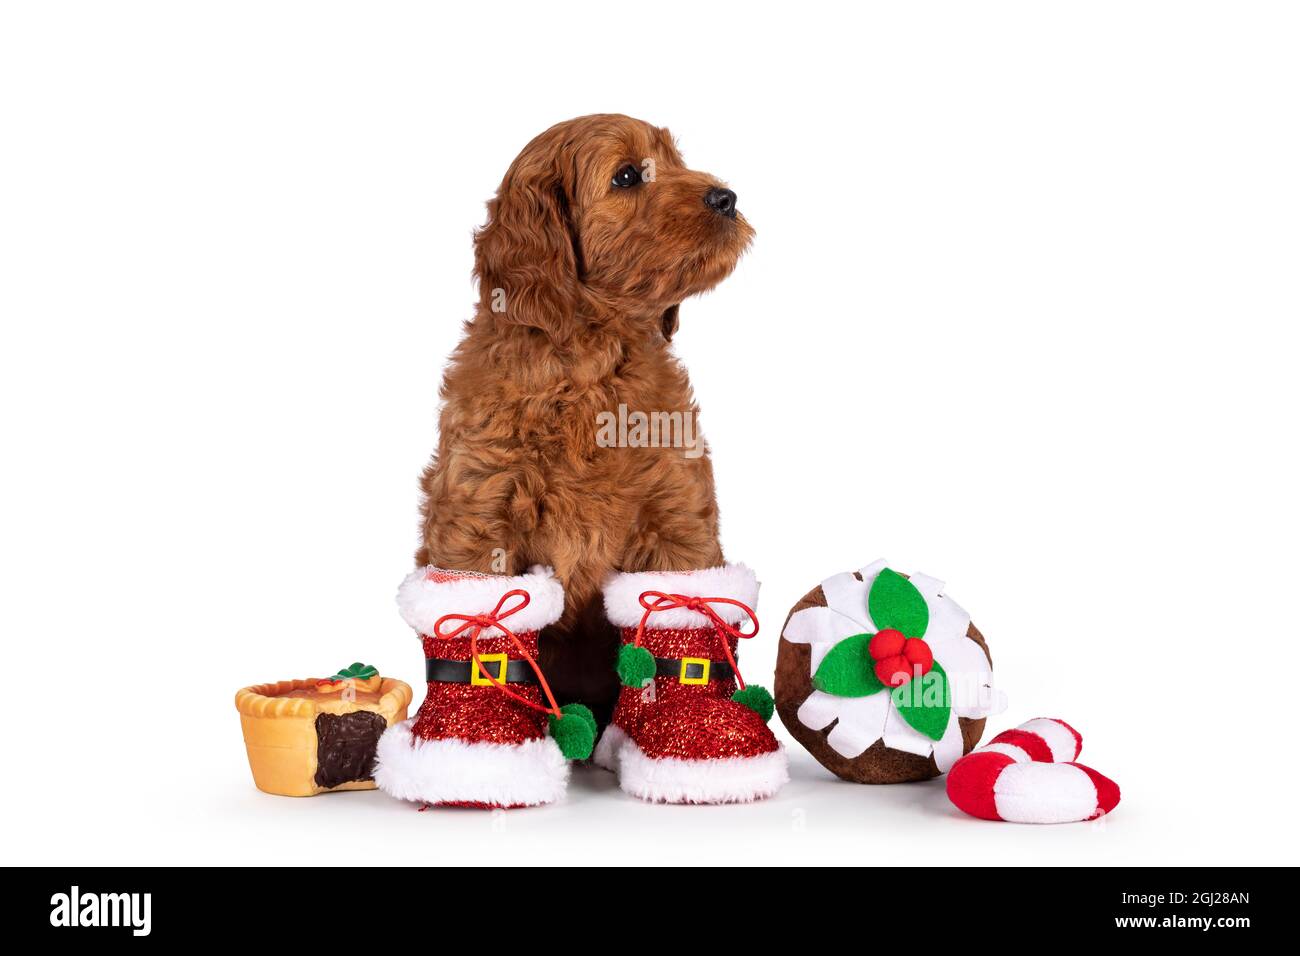 Adorable Cobberdog puppy aka Labradoodle dog, sitting up facing front wearing and sitting inbetween Christmas decorations. Looking side ways away from Stock Photo